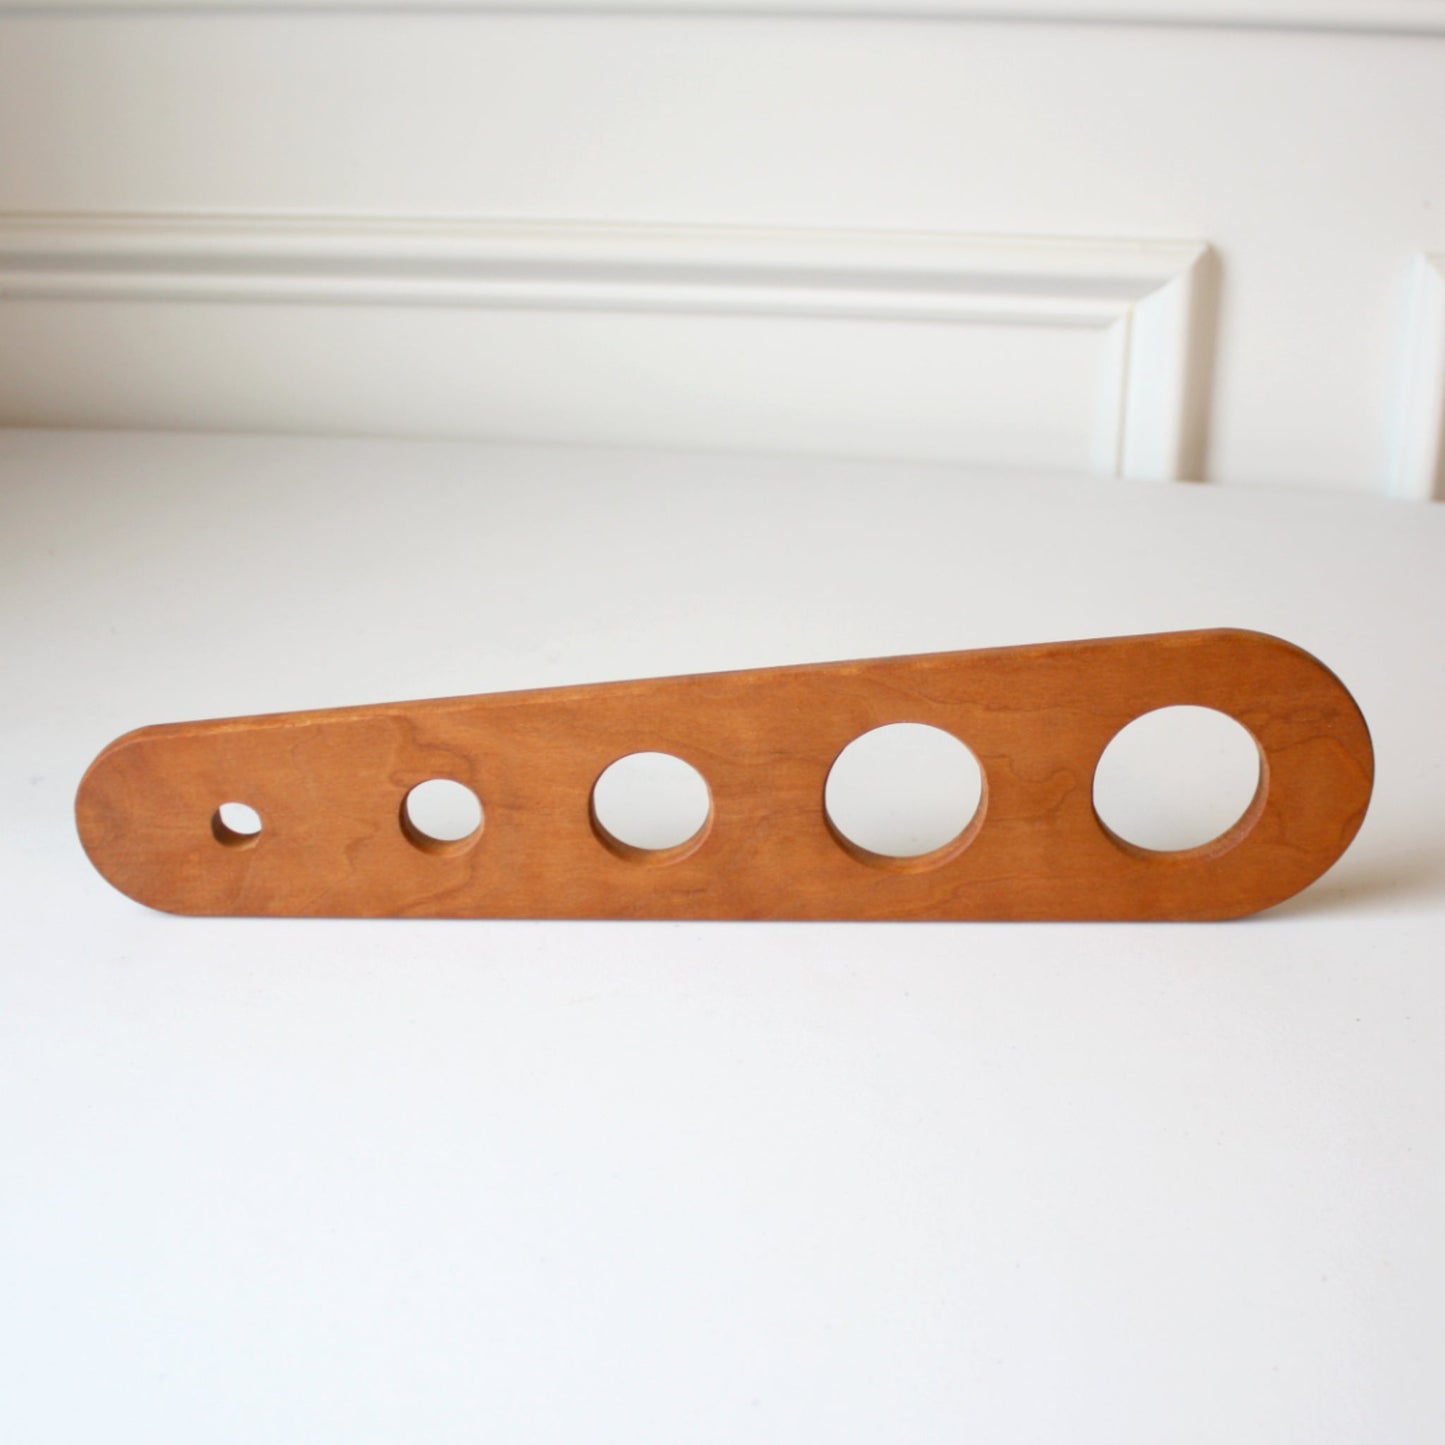 Large Handmade Wooden Pasta Measurer - Made in the USA